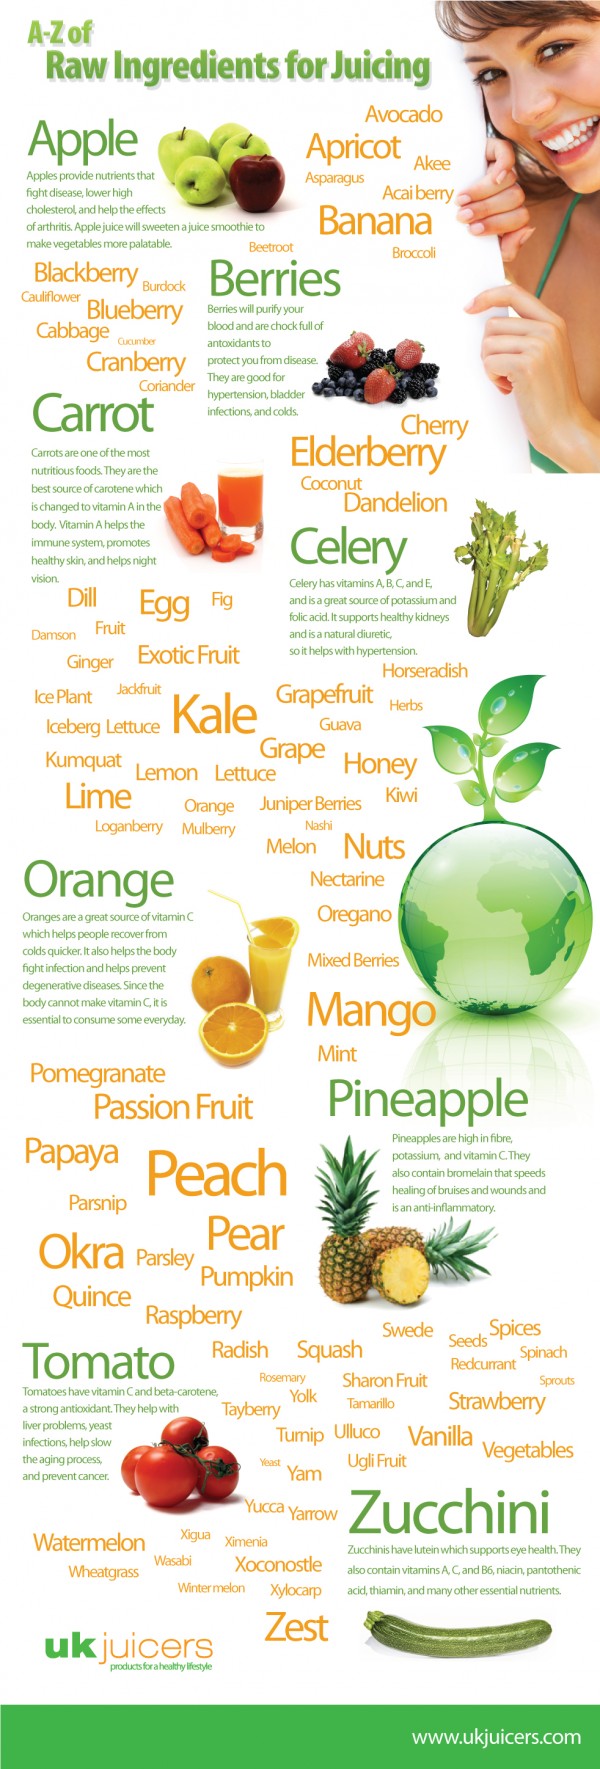 a-z-of-raw-ingredients-for-juicing-infographic